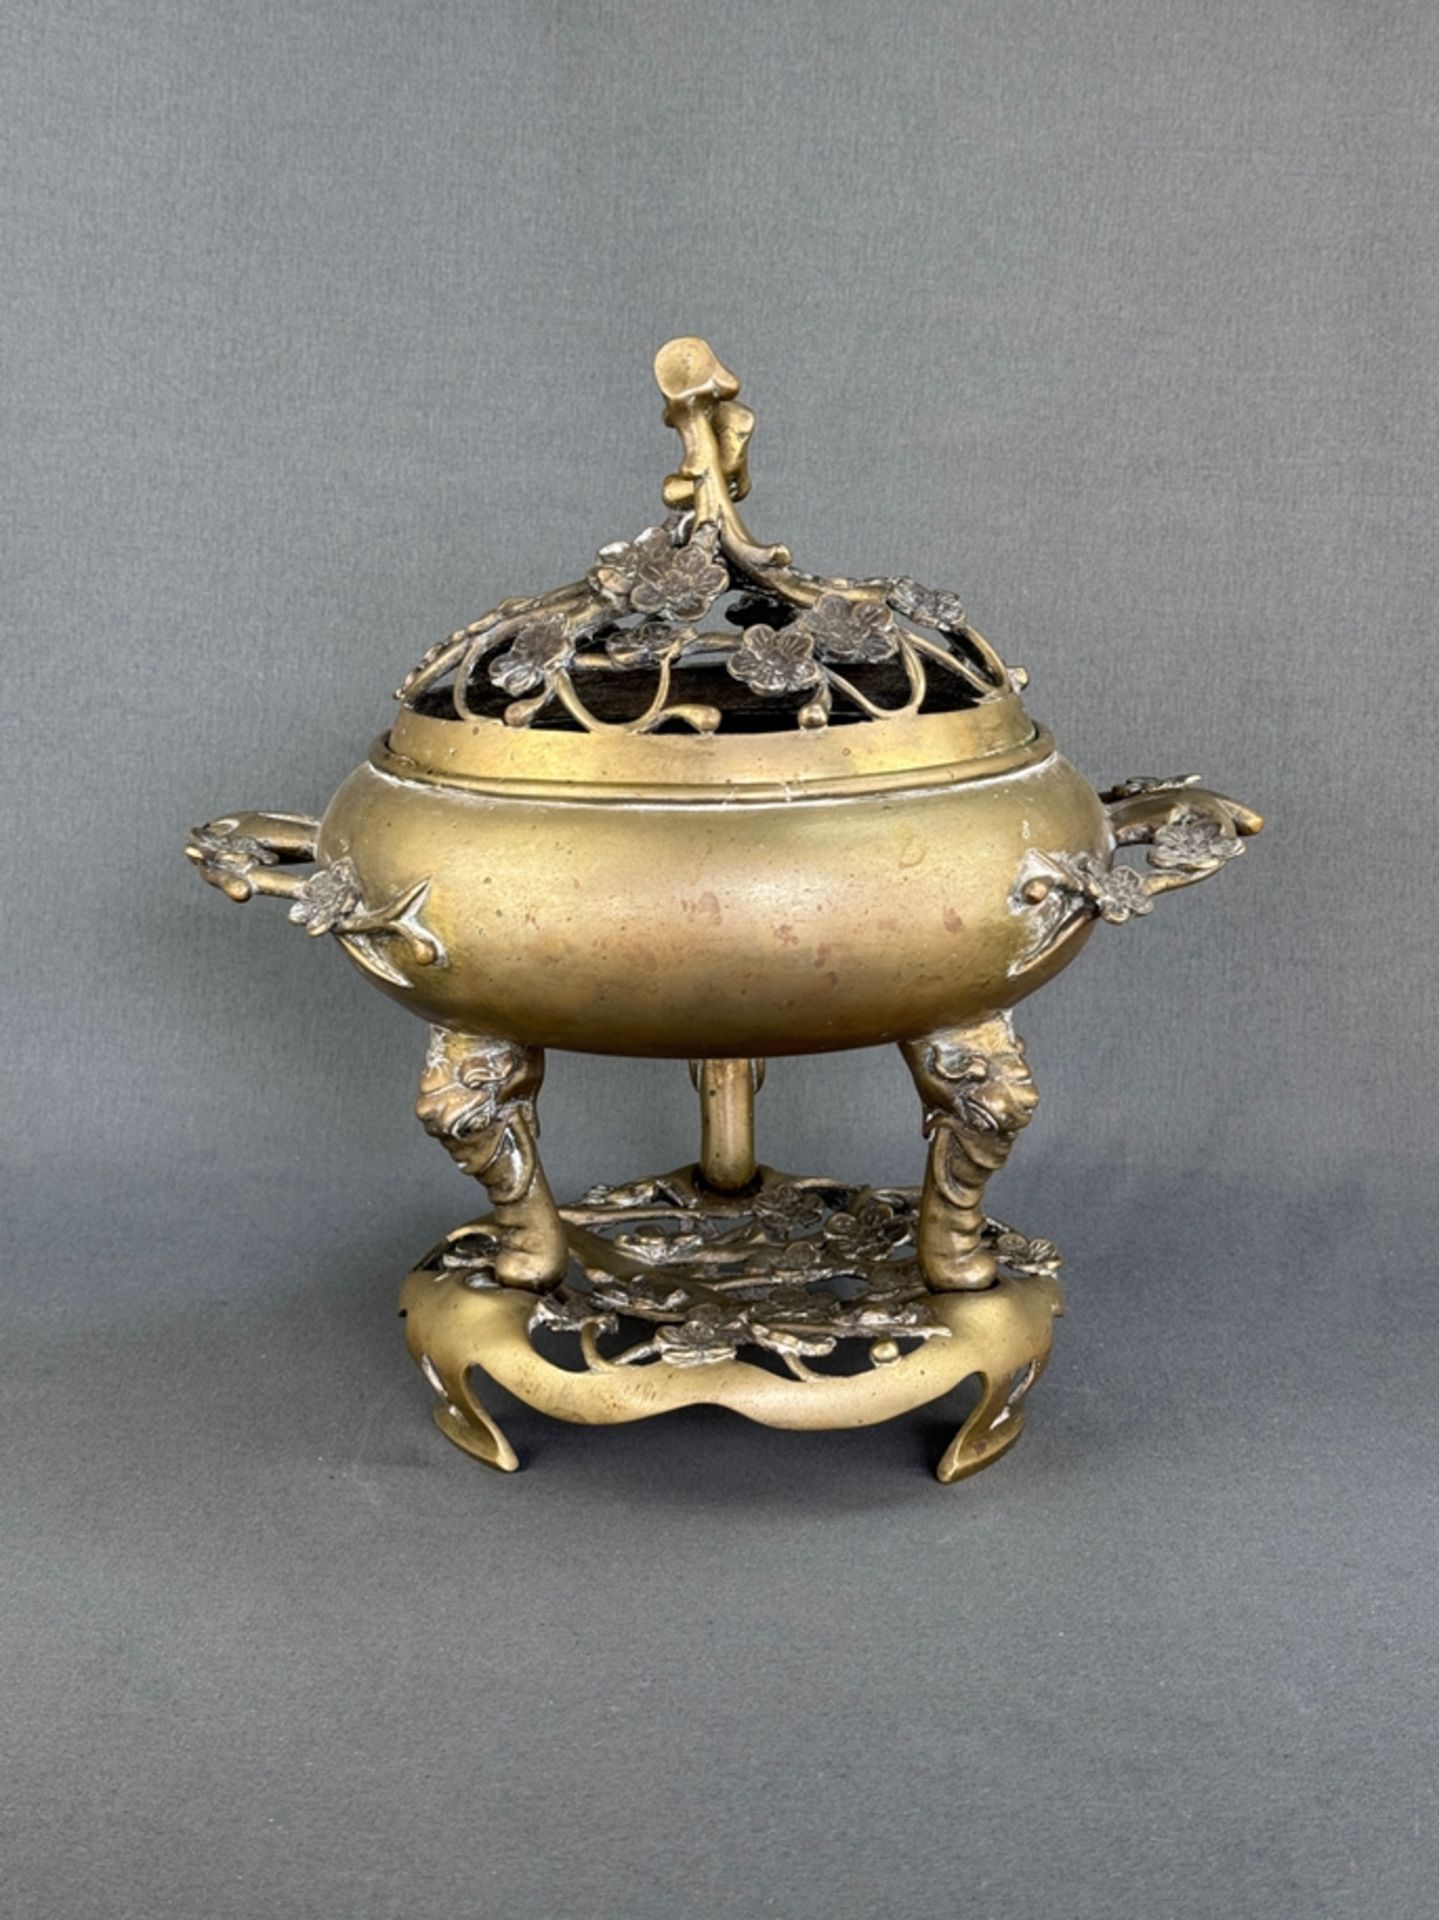 Incense burner, China, brass, decorated with cherry blossom motifs, on stand, height 30cm, diameter